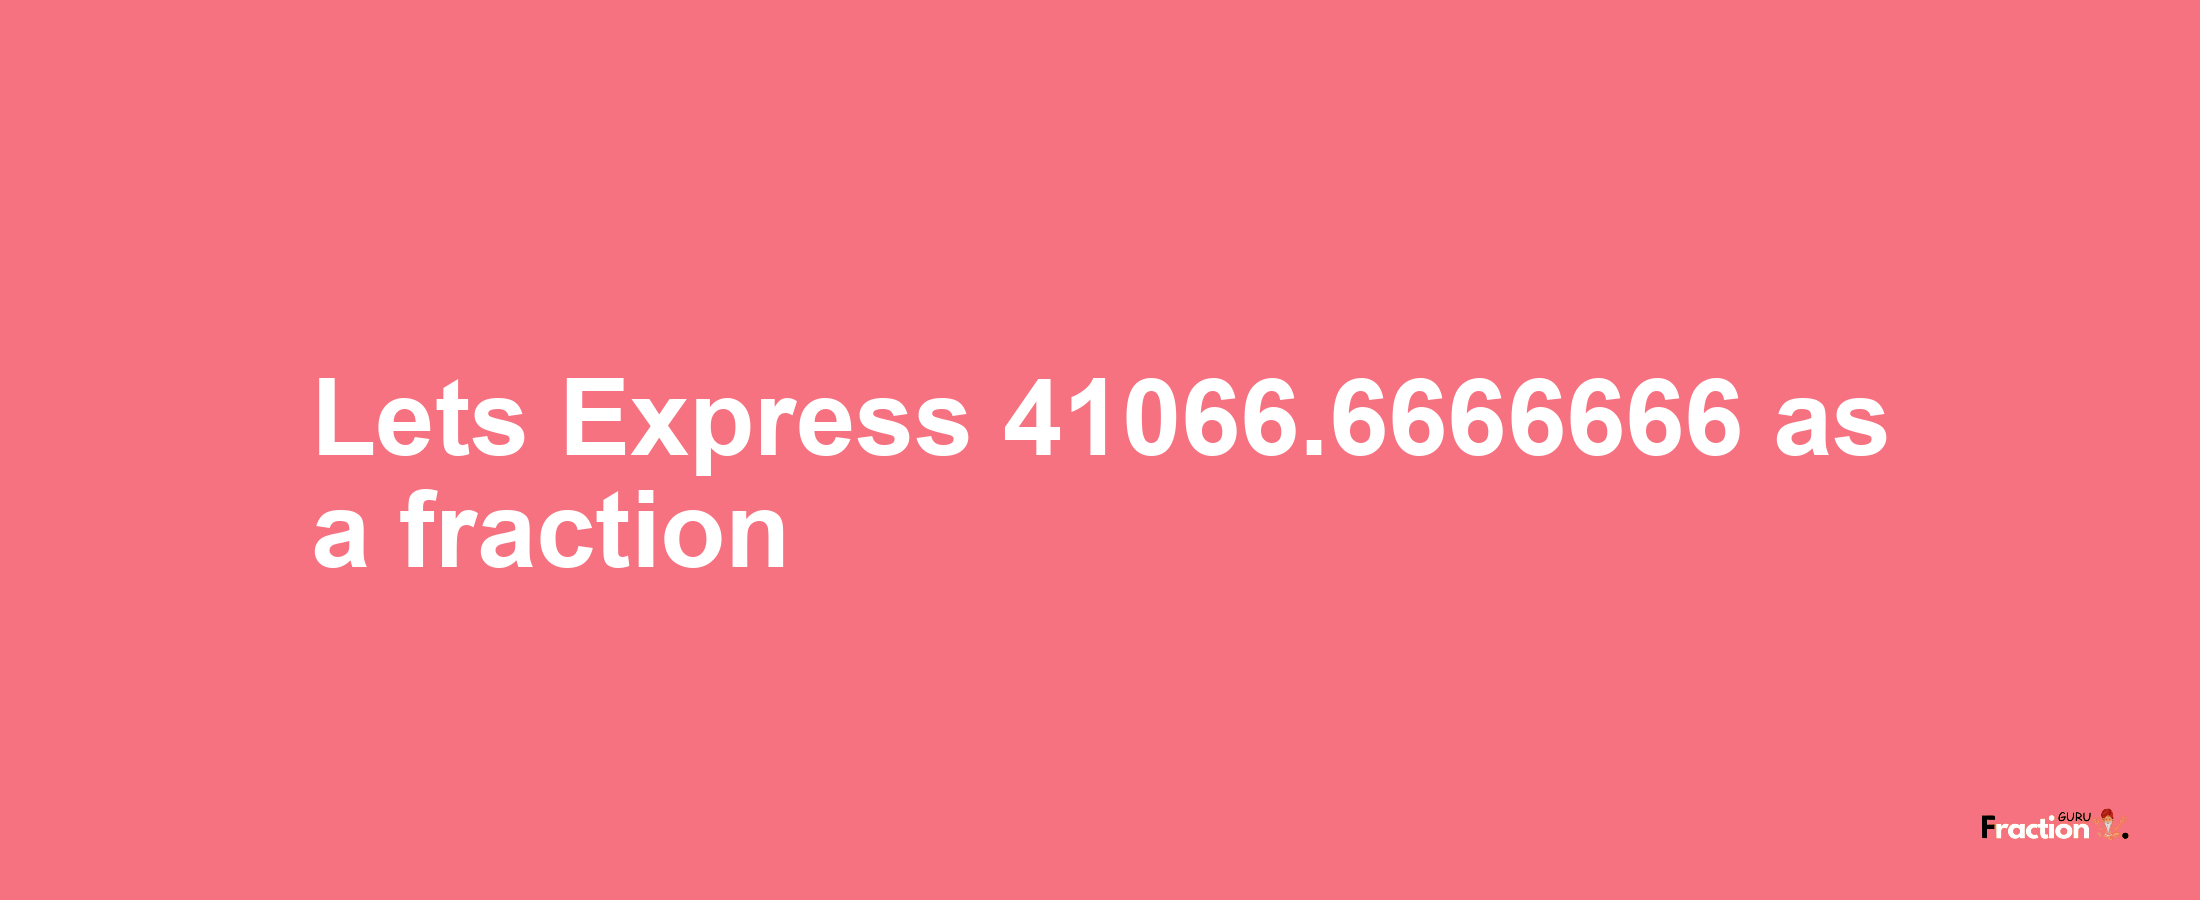 Lets Express 41066.6666666 as afraction